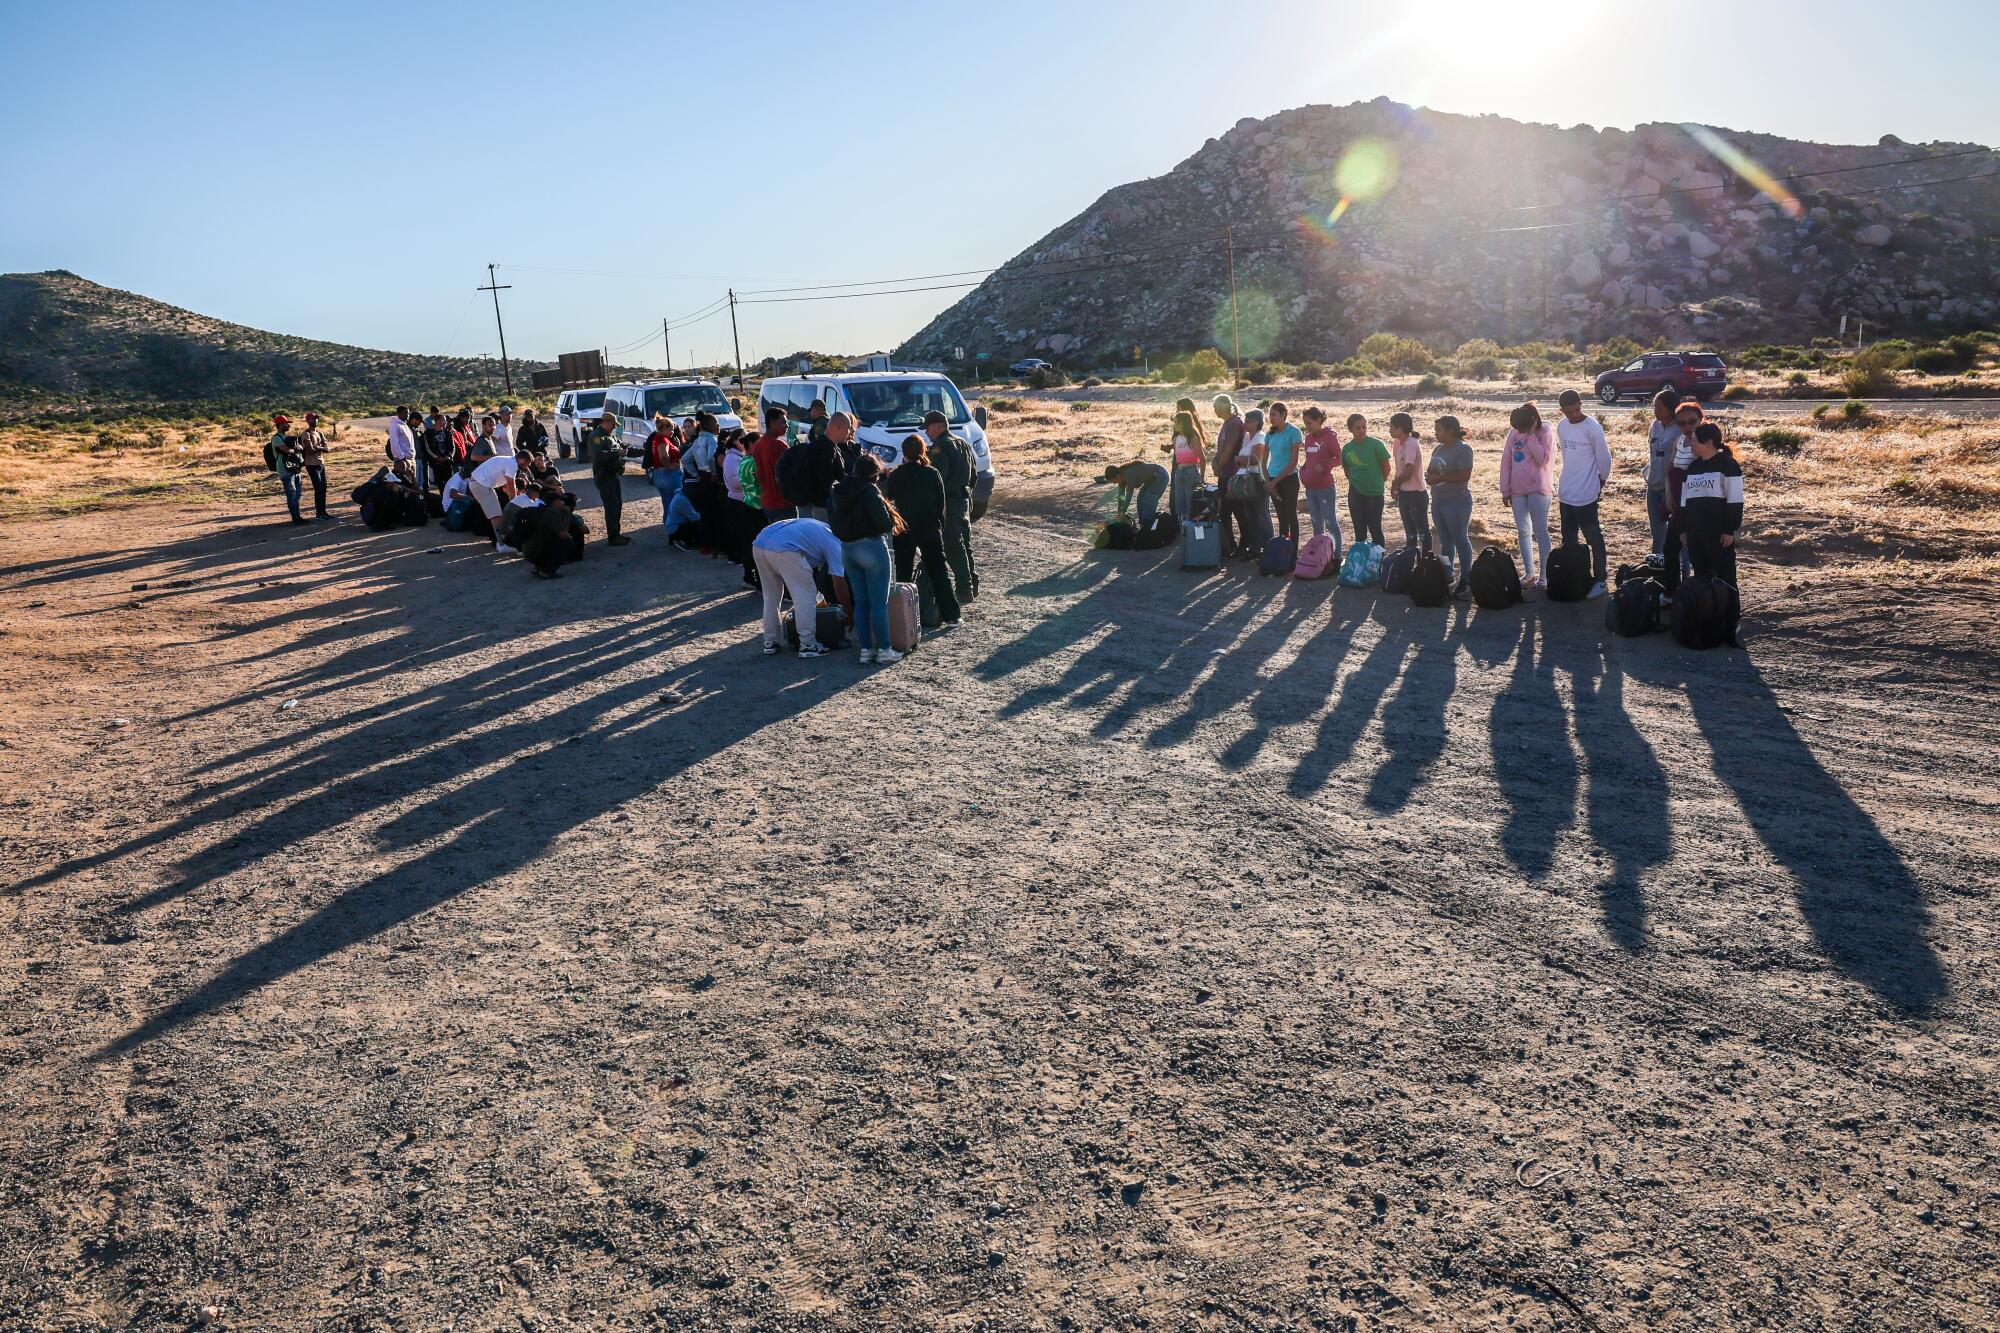 People line up on a desert landscape with a small mountain behind